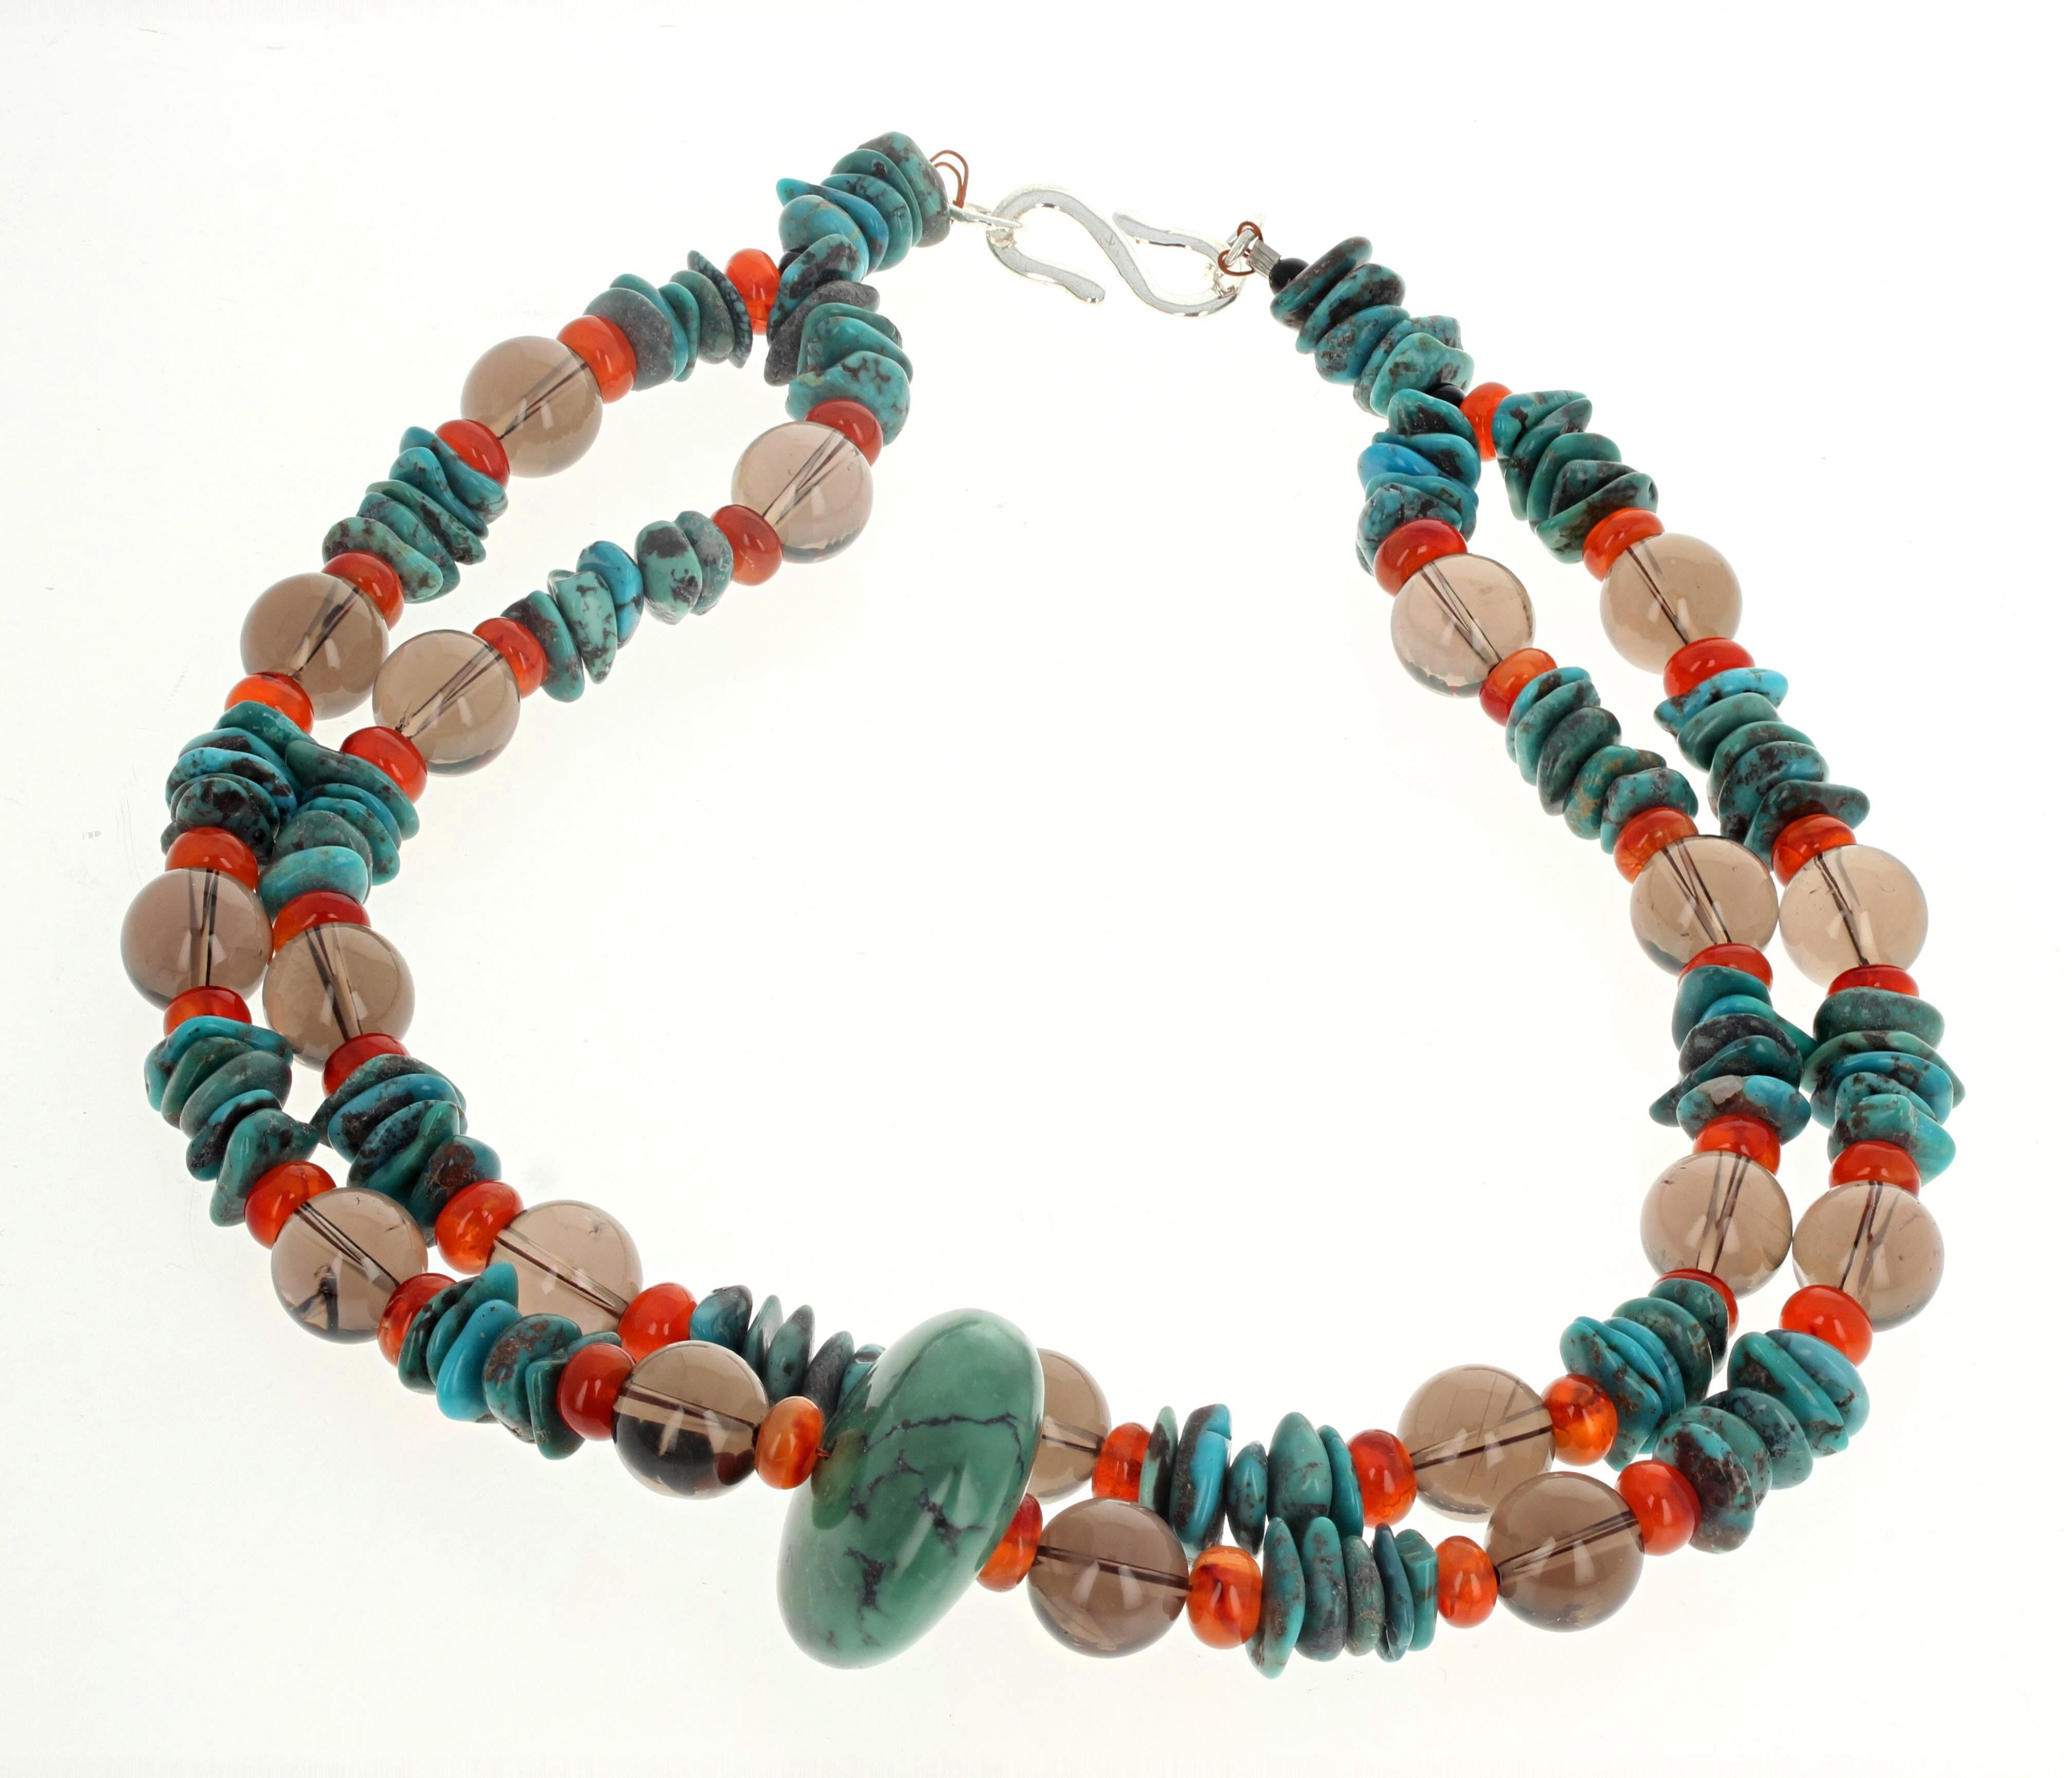 This fascinating artistic necklace is 17 1/2 inches long with a silver easy to use hook clasp.  The center Turquoise is 30mm, the natural real Smoky Quartz are 12 1/2mm, the Carnelian are approximately 8mm, and the small Turquoise are approximately